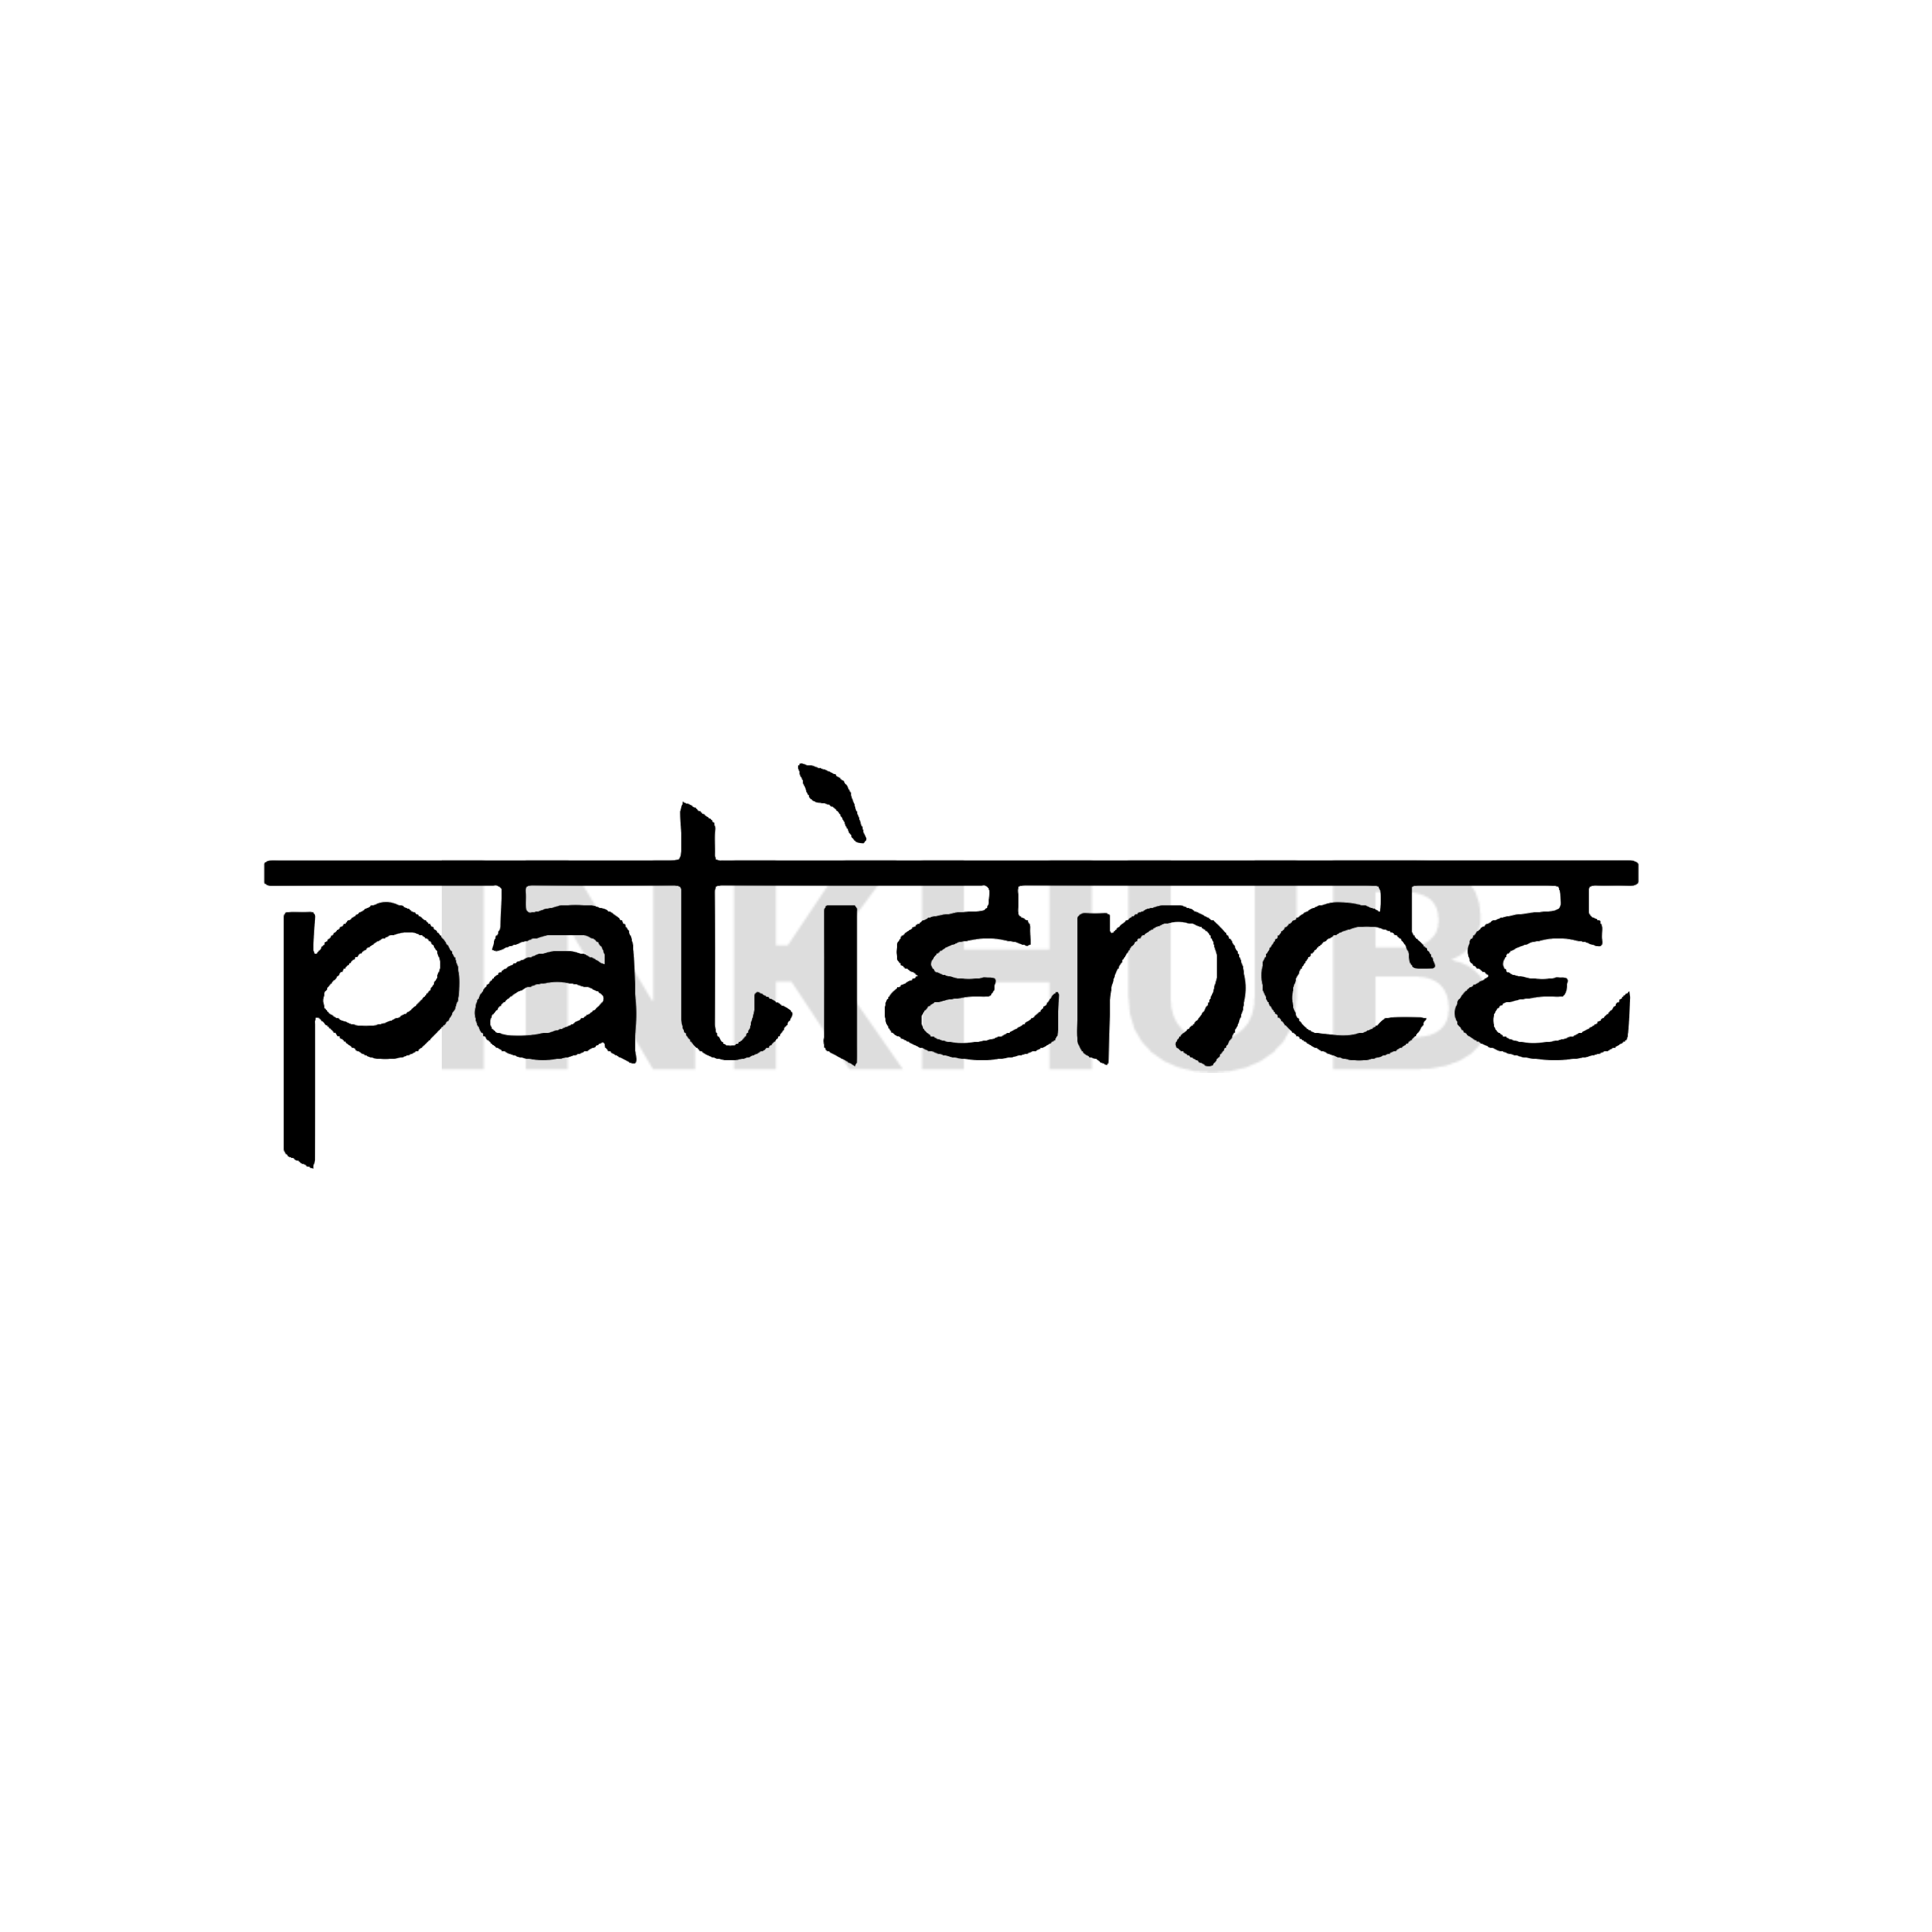 patience #tattoo #wrist | Patience tattoo, Wrist tattoos words, Small hand  tattoos